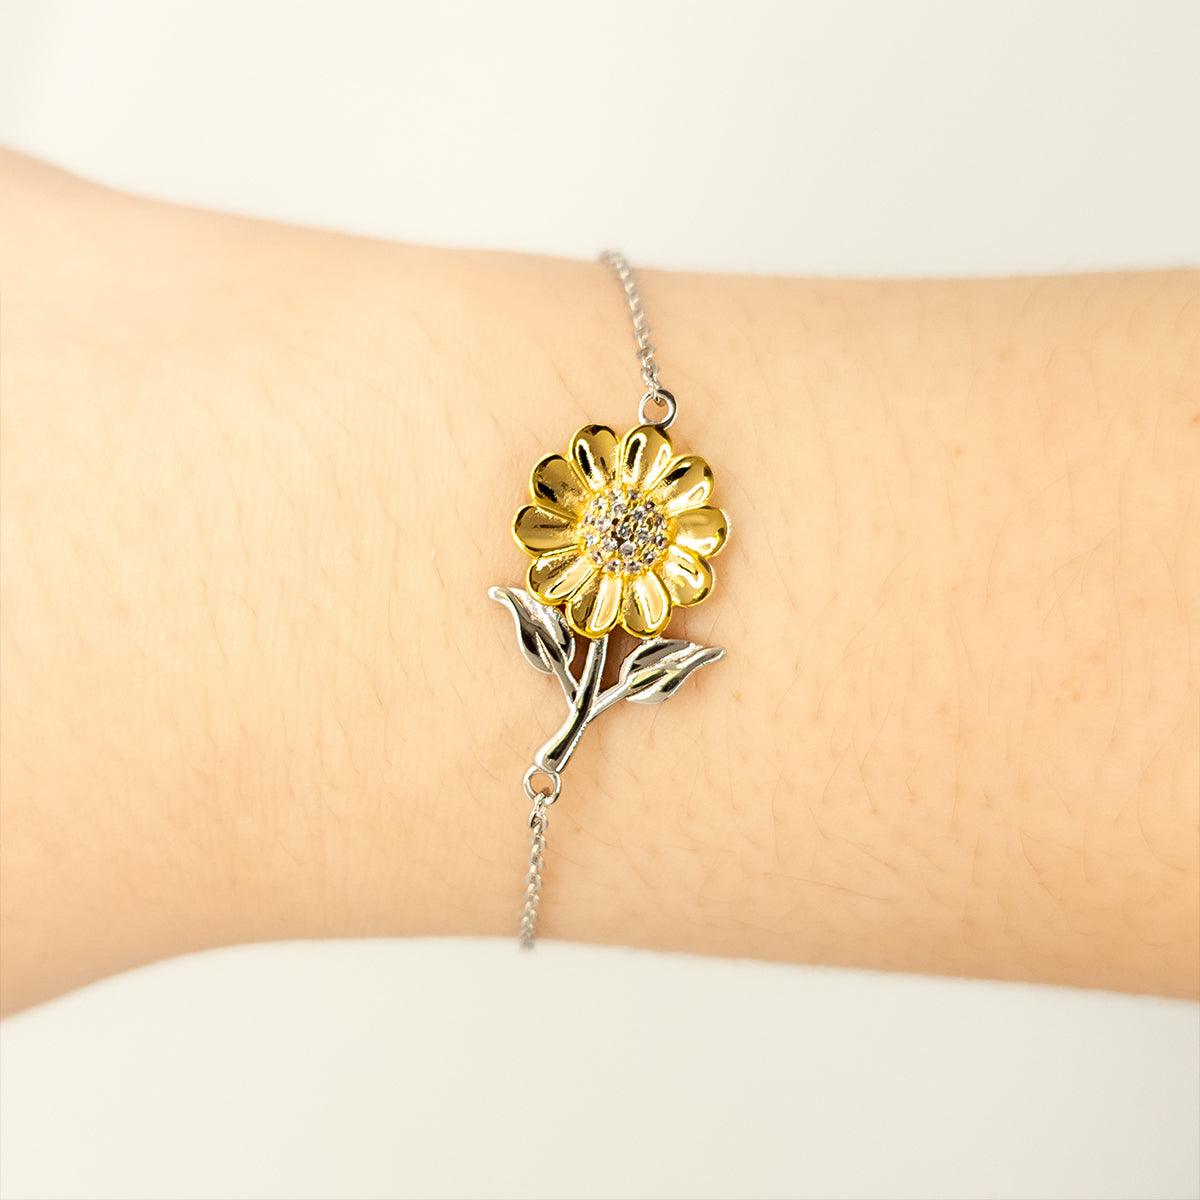 Executive Assistant Sunflower Bracelet - Thanks for being who you are - Birthday Christmas Jewelry Gifts Coworkers Colleague Boss - Mallard Moon Gift Shop